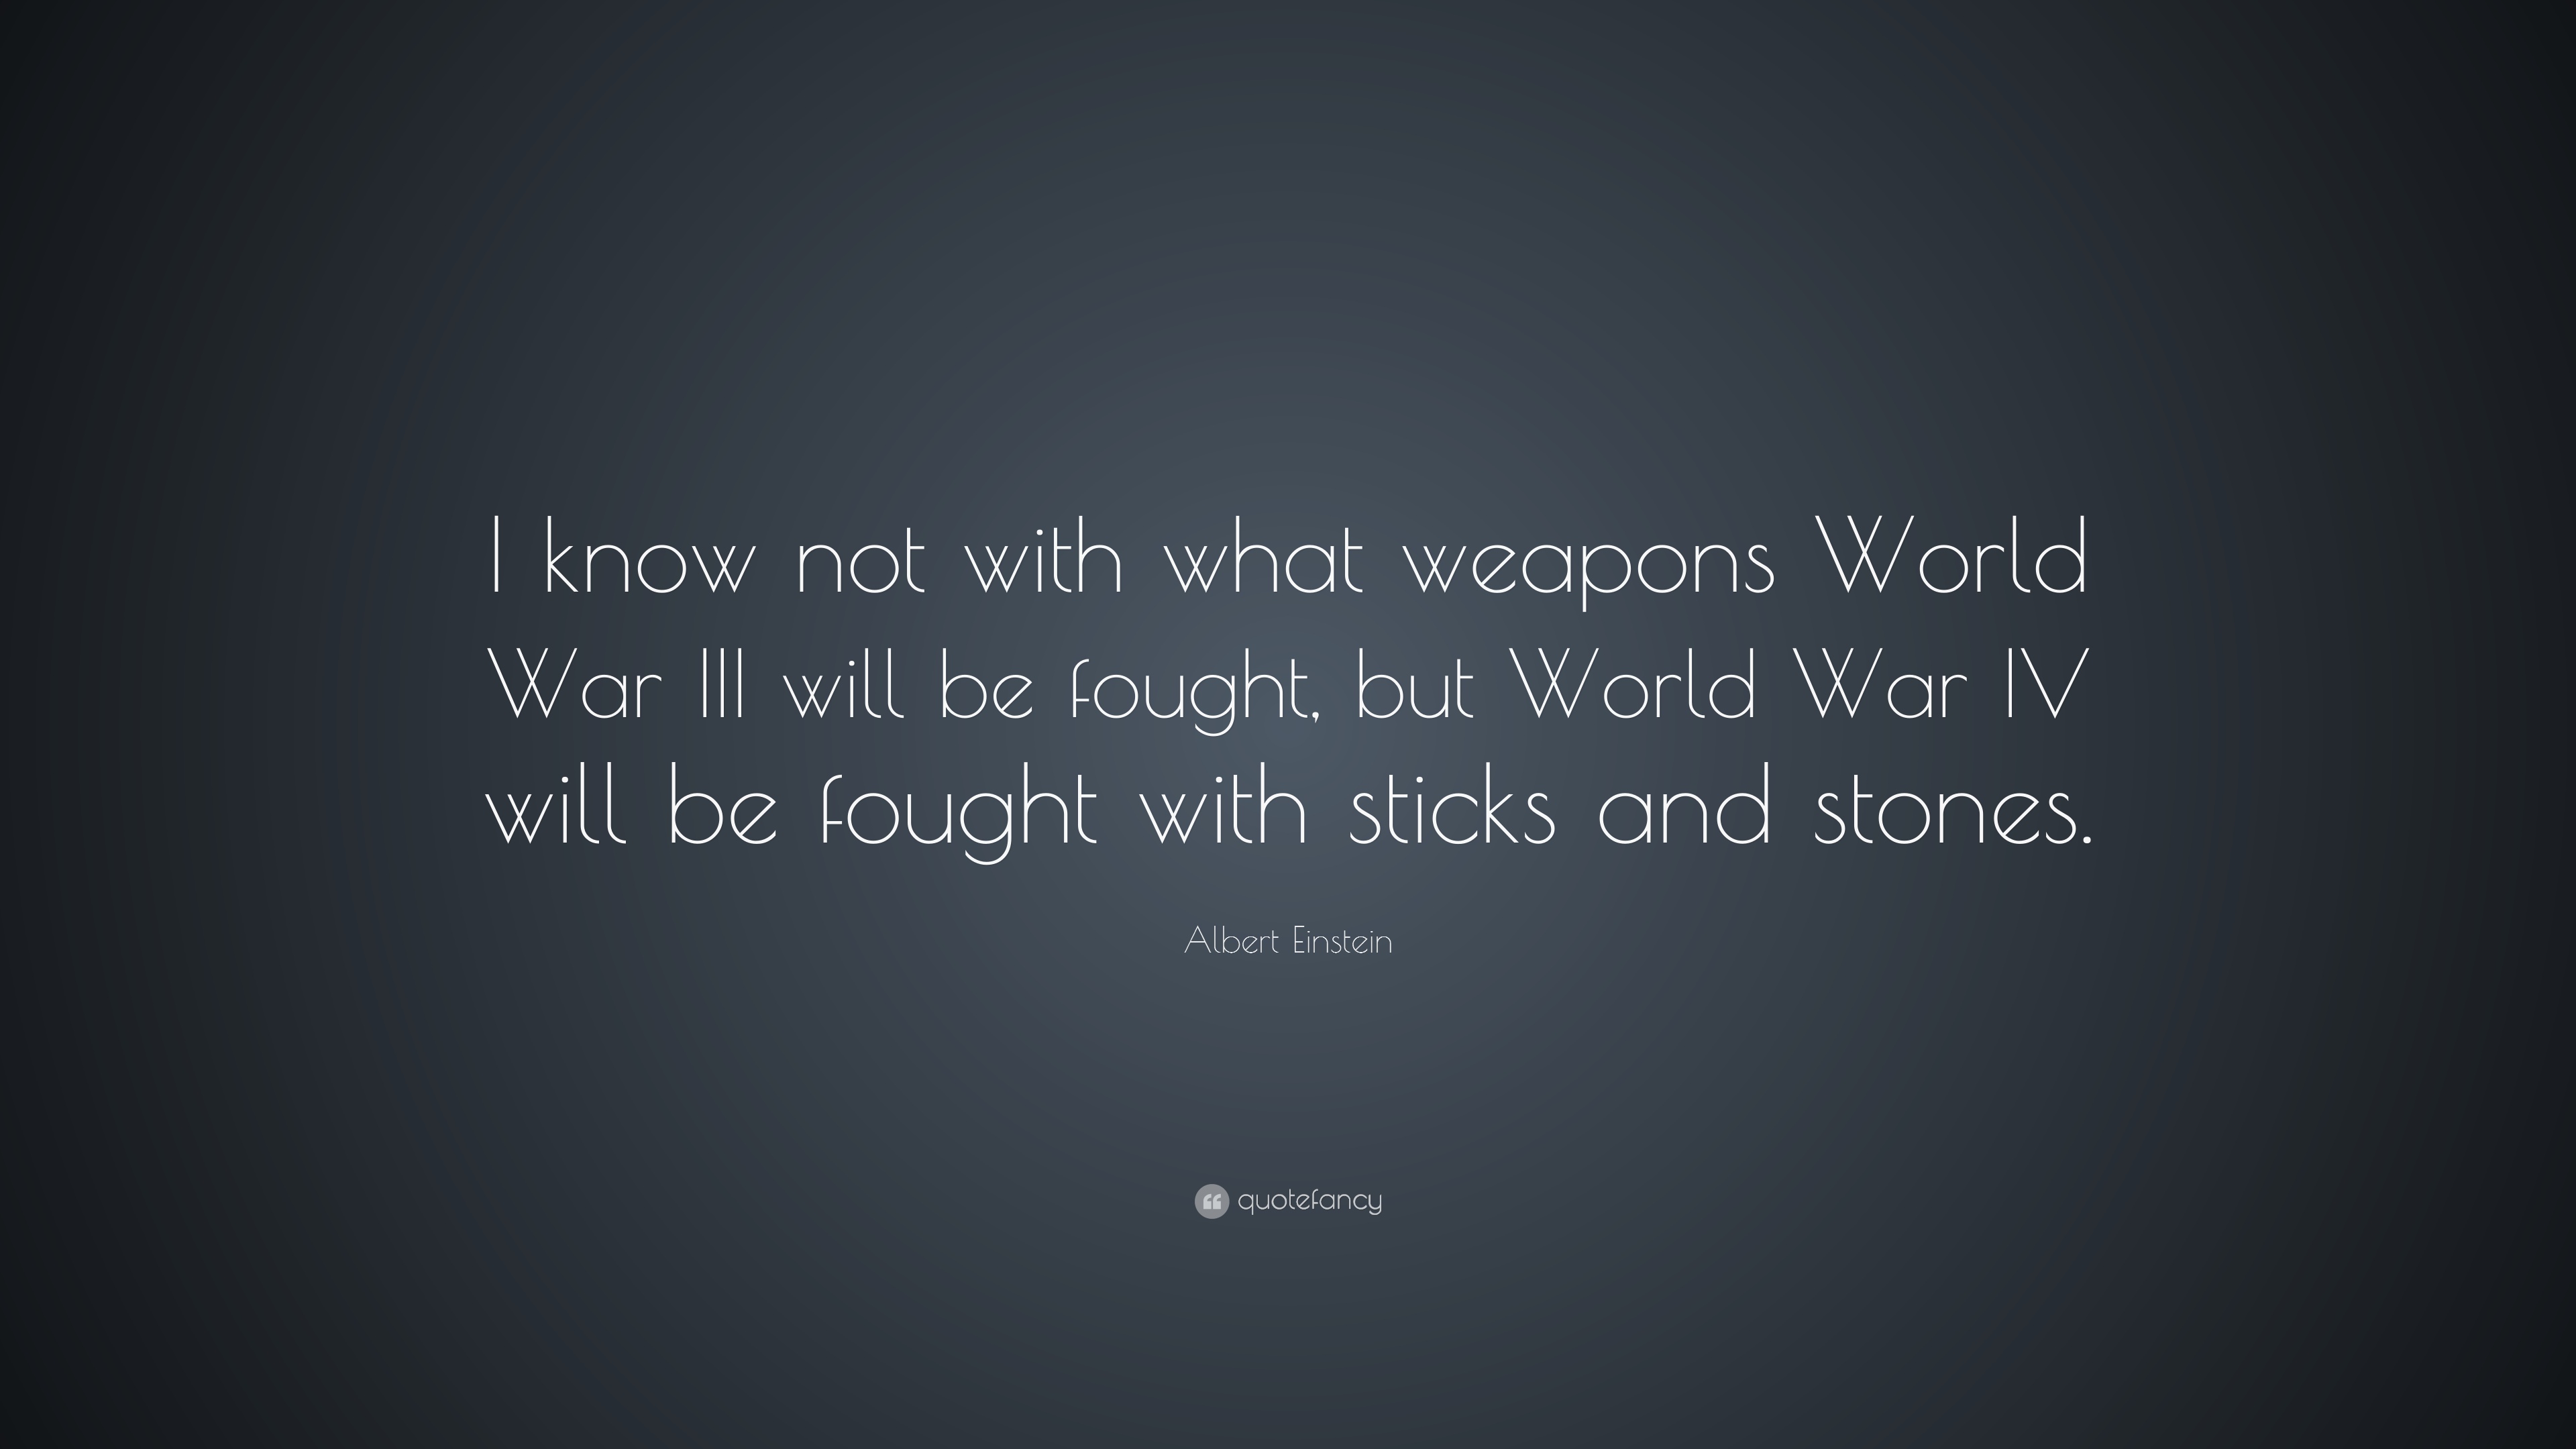 Albert Einstein Quote I know not with what weapons World War III